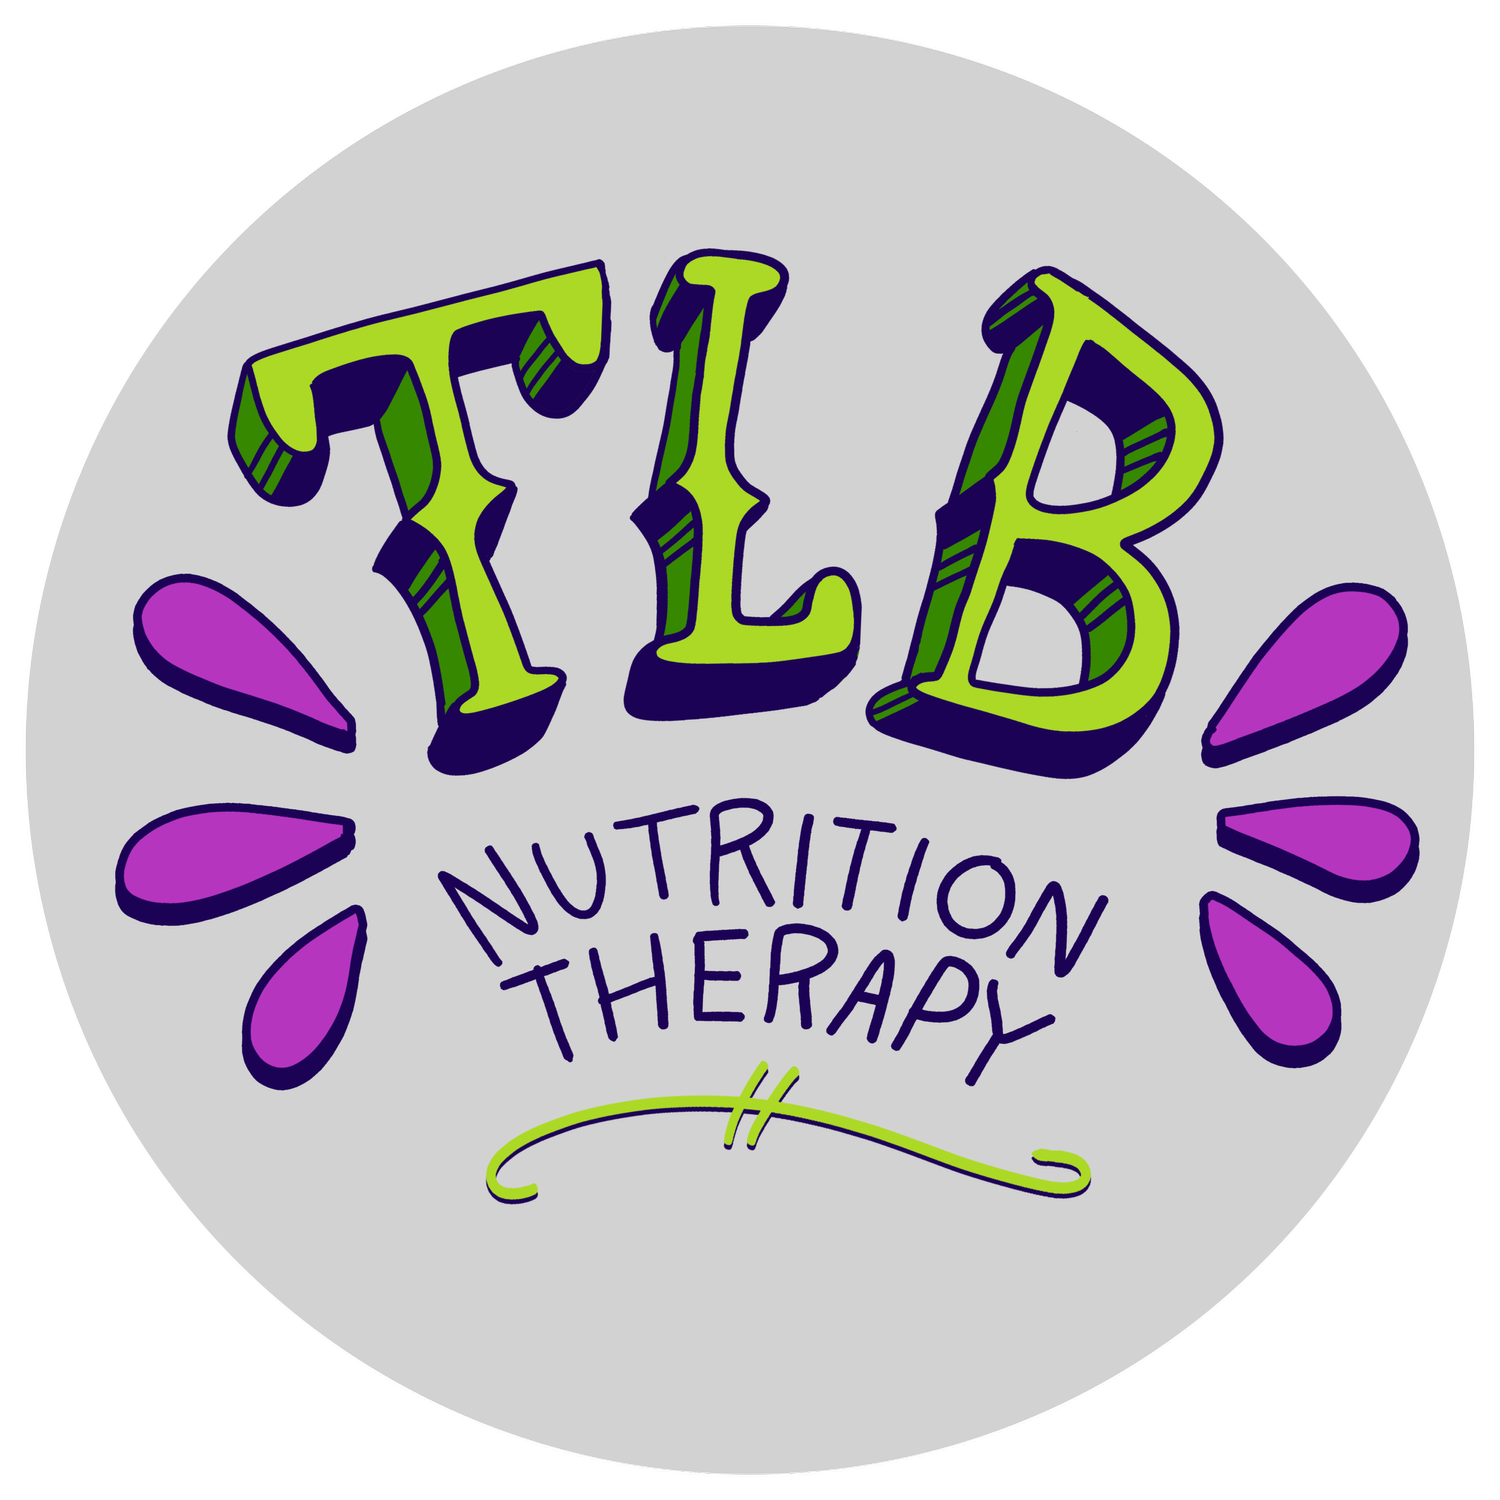 TLB Nutrition Therapy